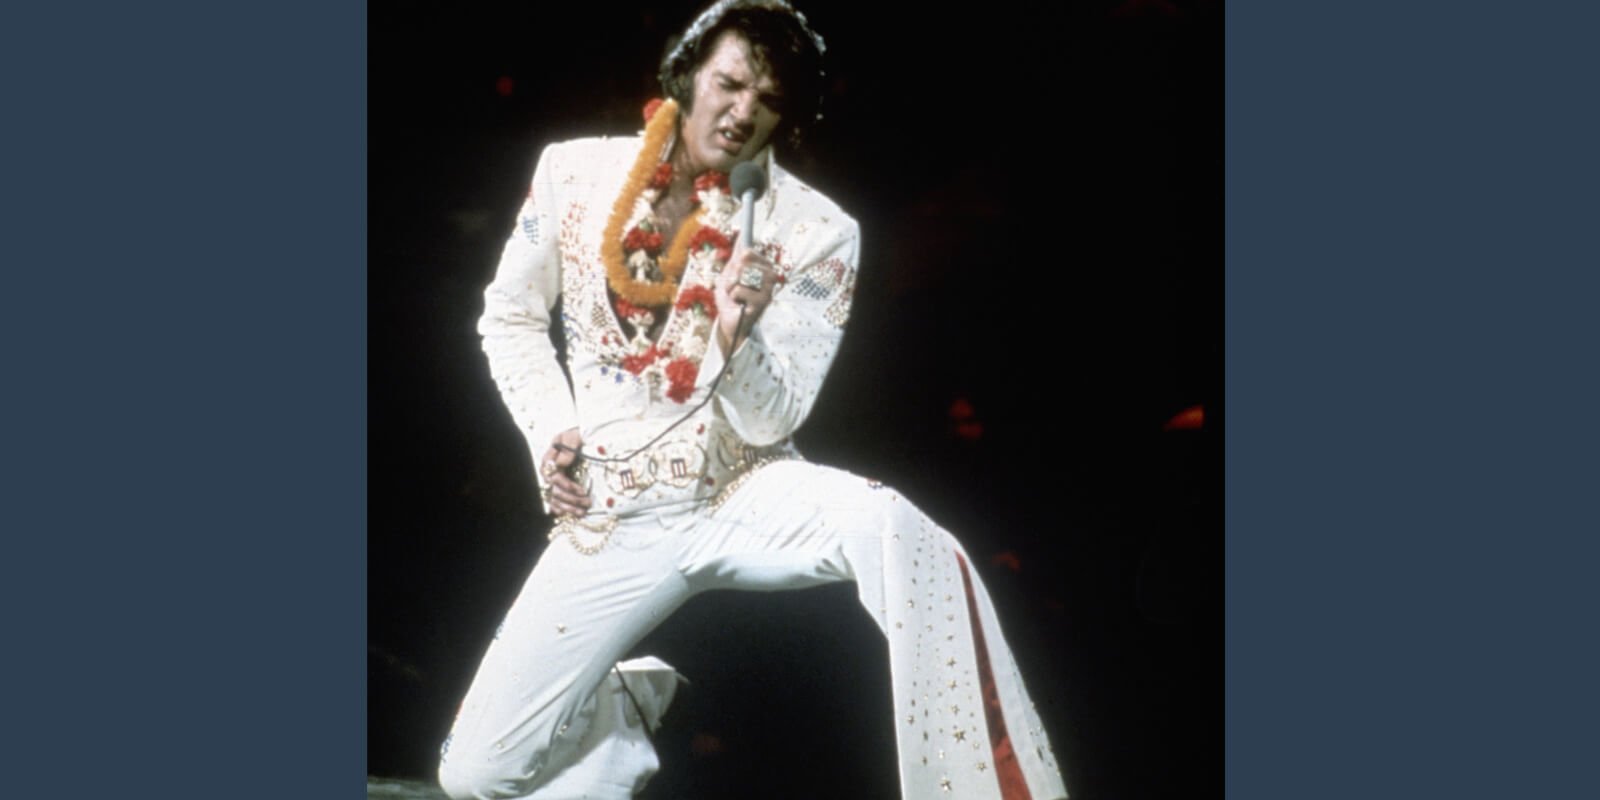 Elvis Presley's jumpsuits became an important part of his stage persona and legend.